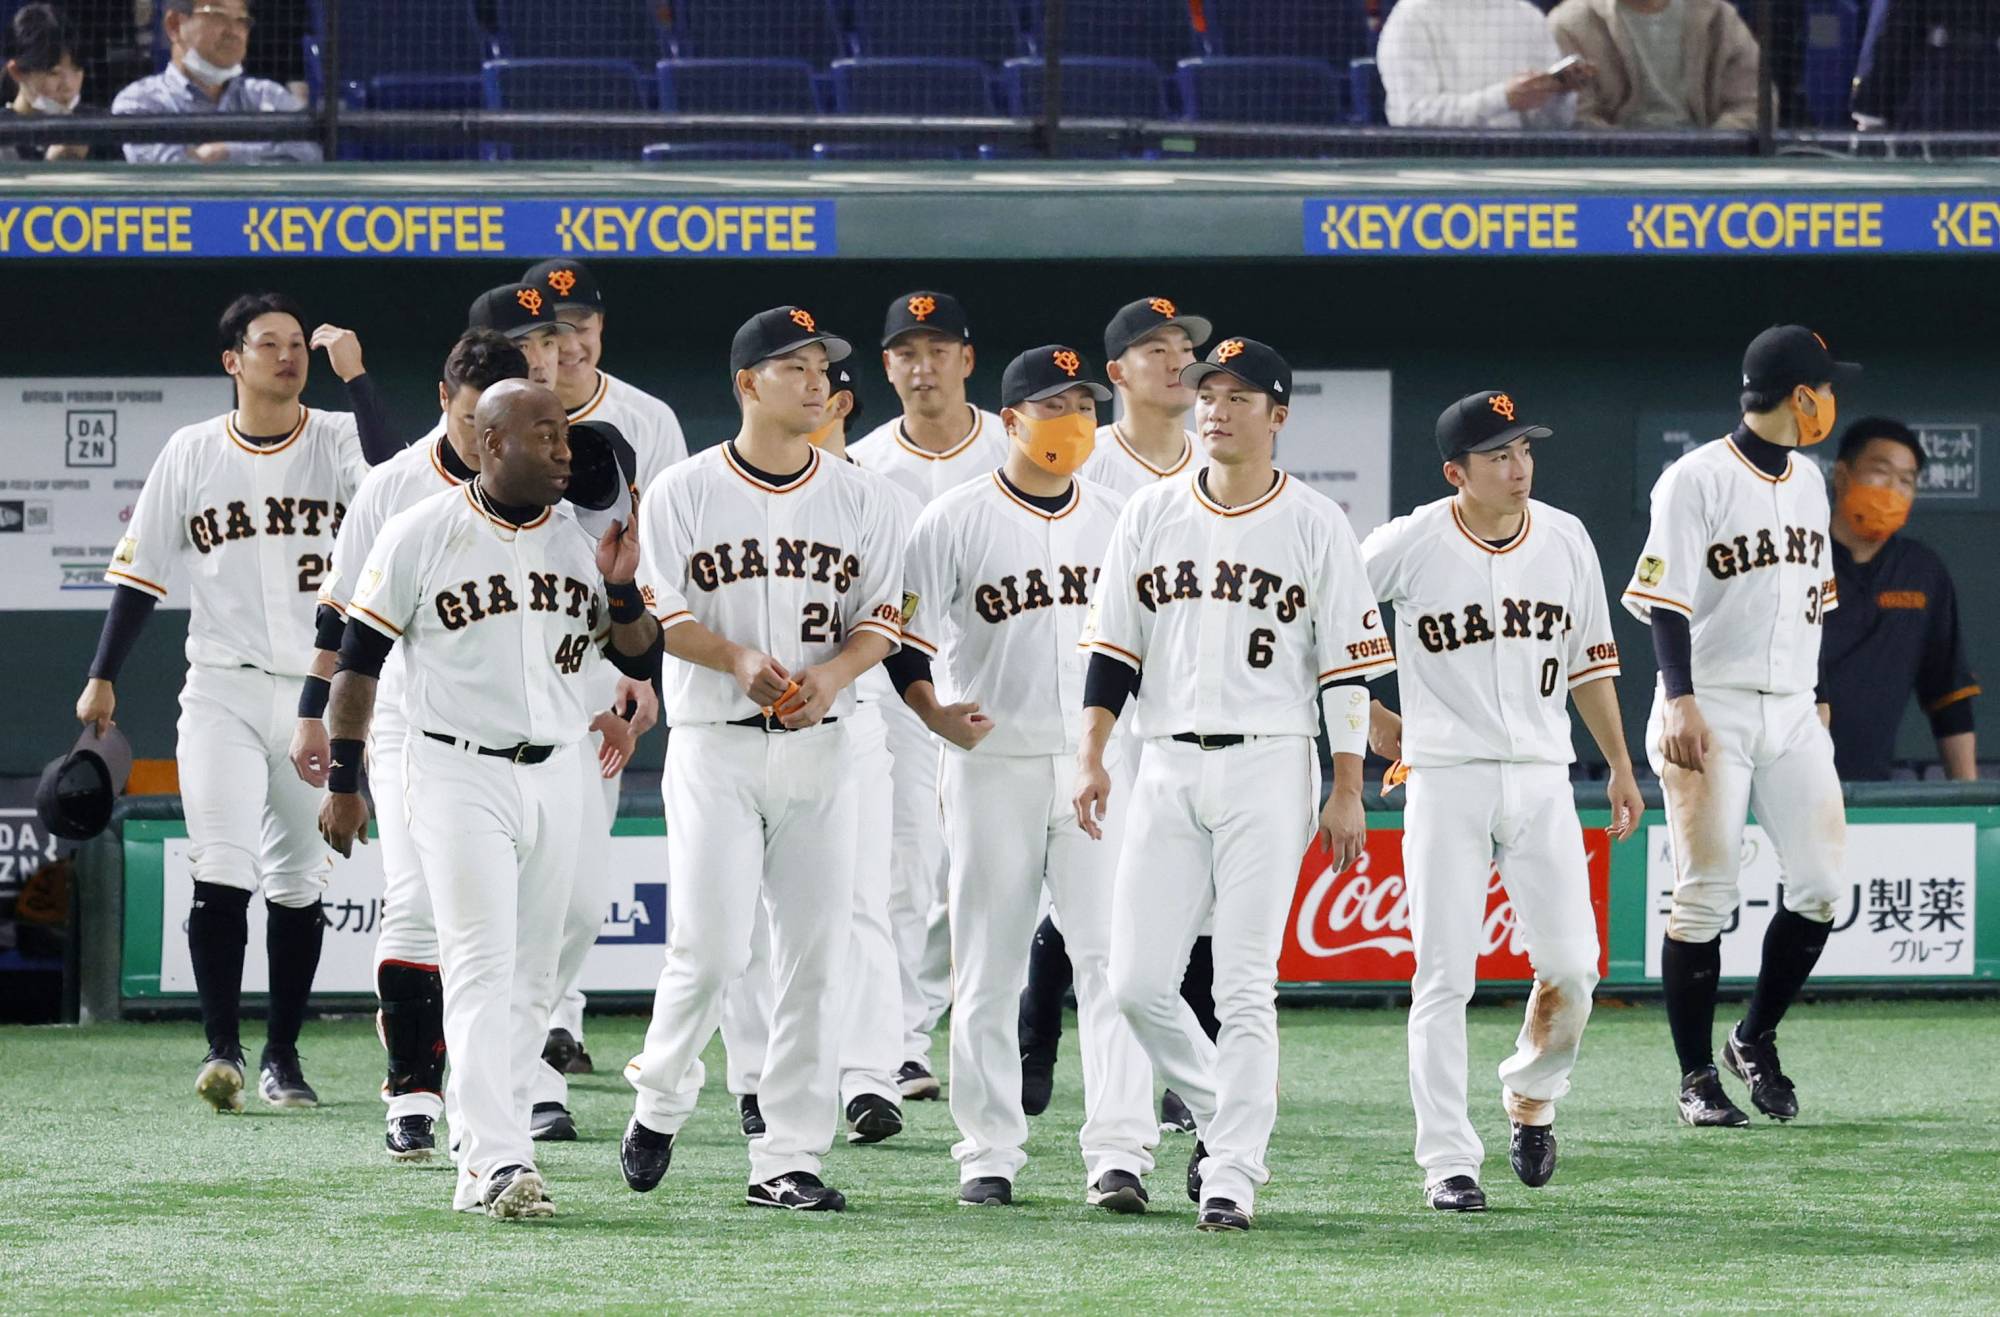 NPB strikes out with move to eliminate extra innings